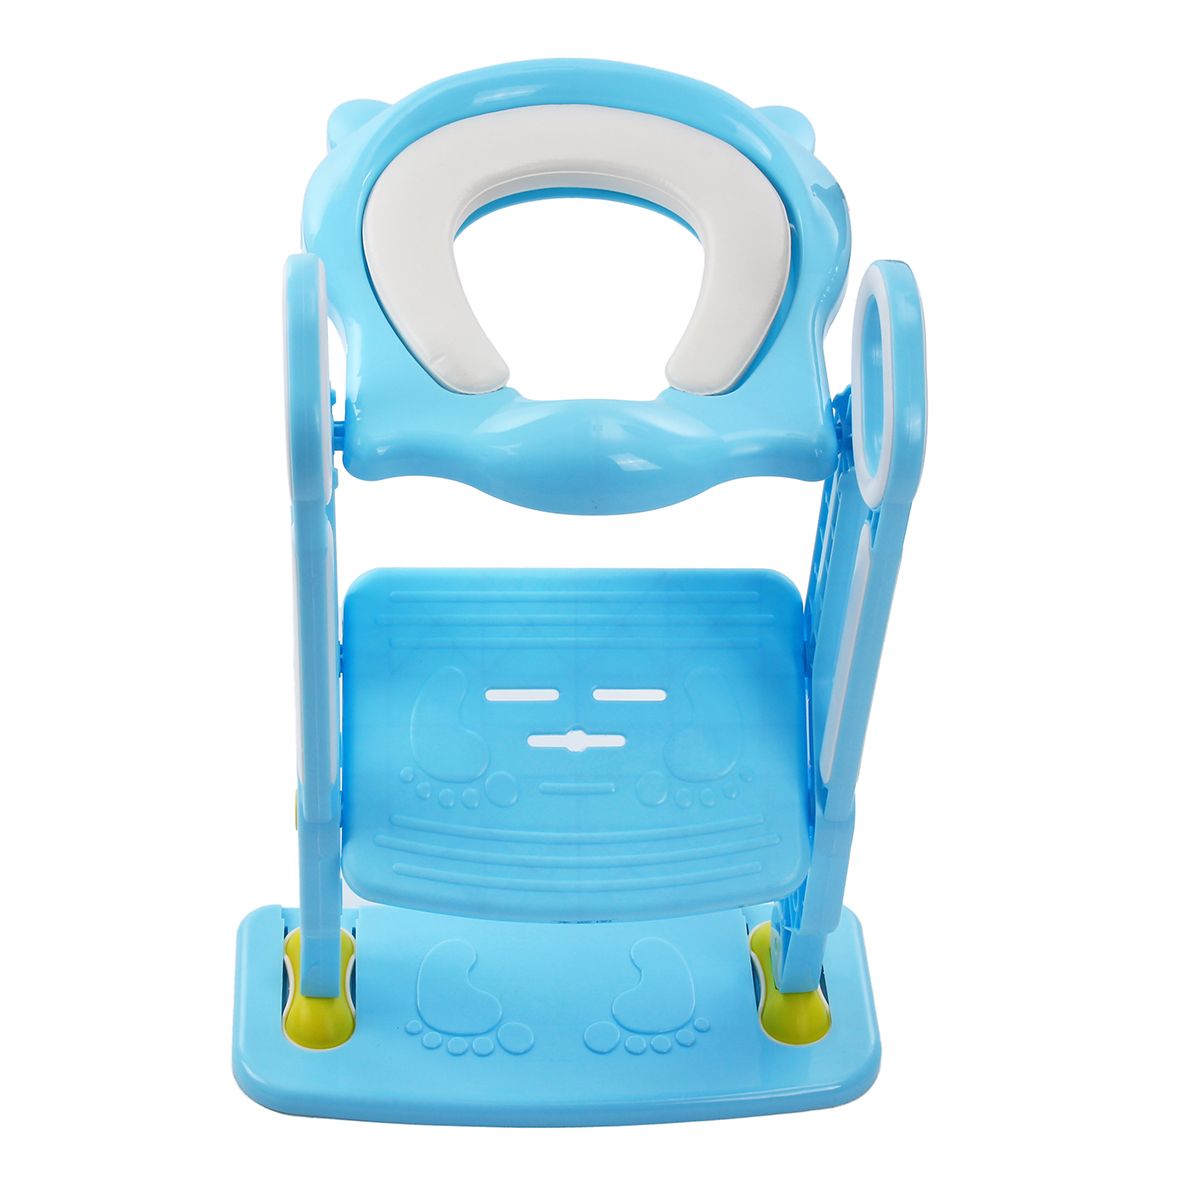 Folding-Baby-Potty-Infant-Kids-Toilet-Training-Seat-with-Adjustable-Ladder-Portable-Urinal-Potty-Tra-1561507